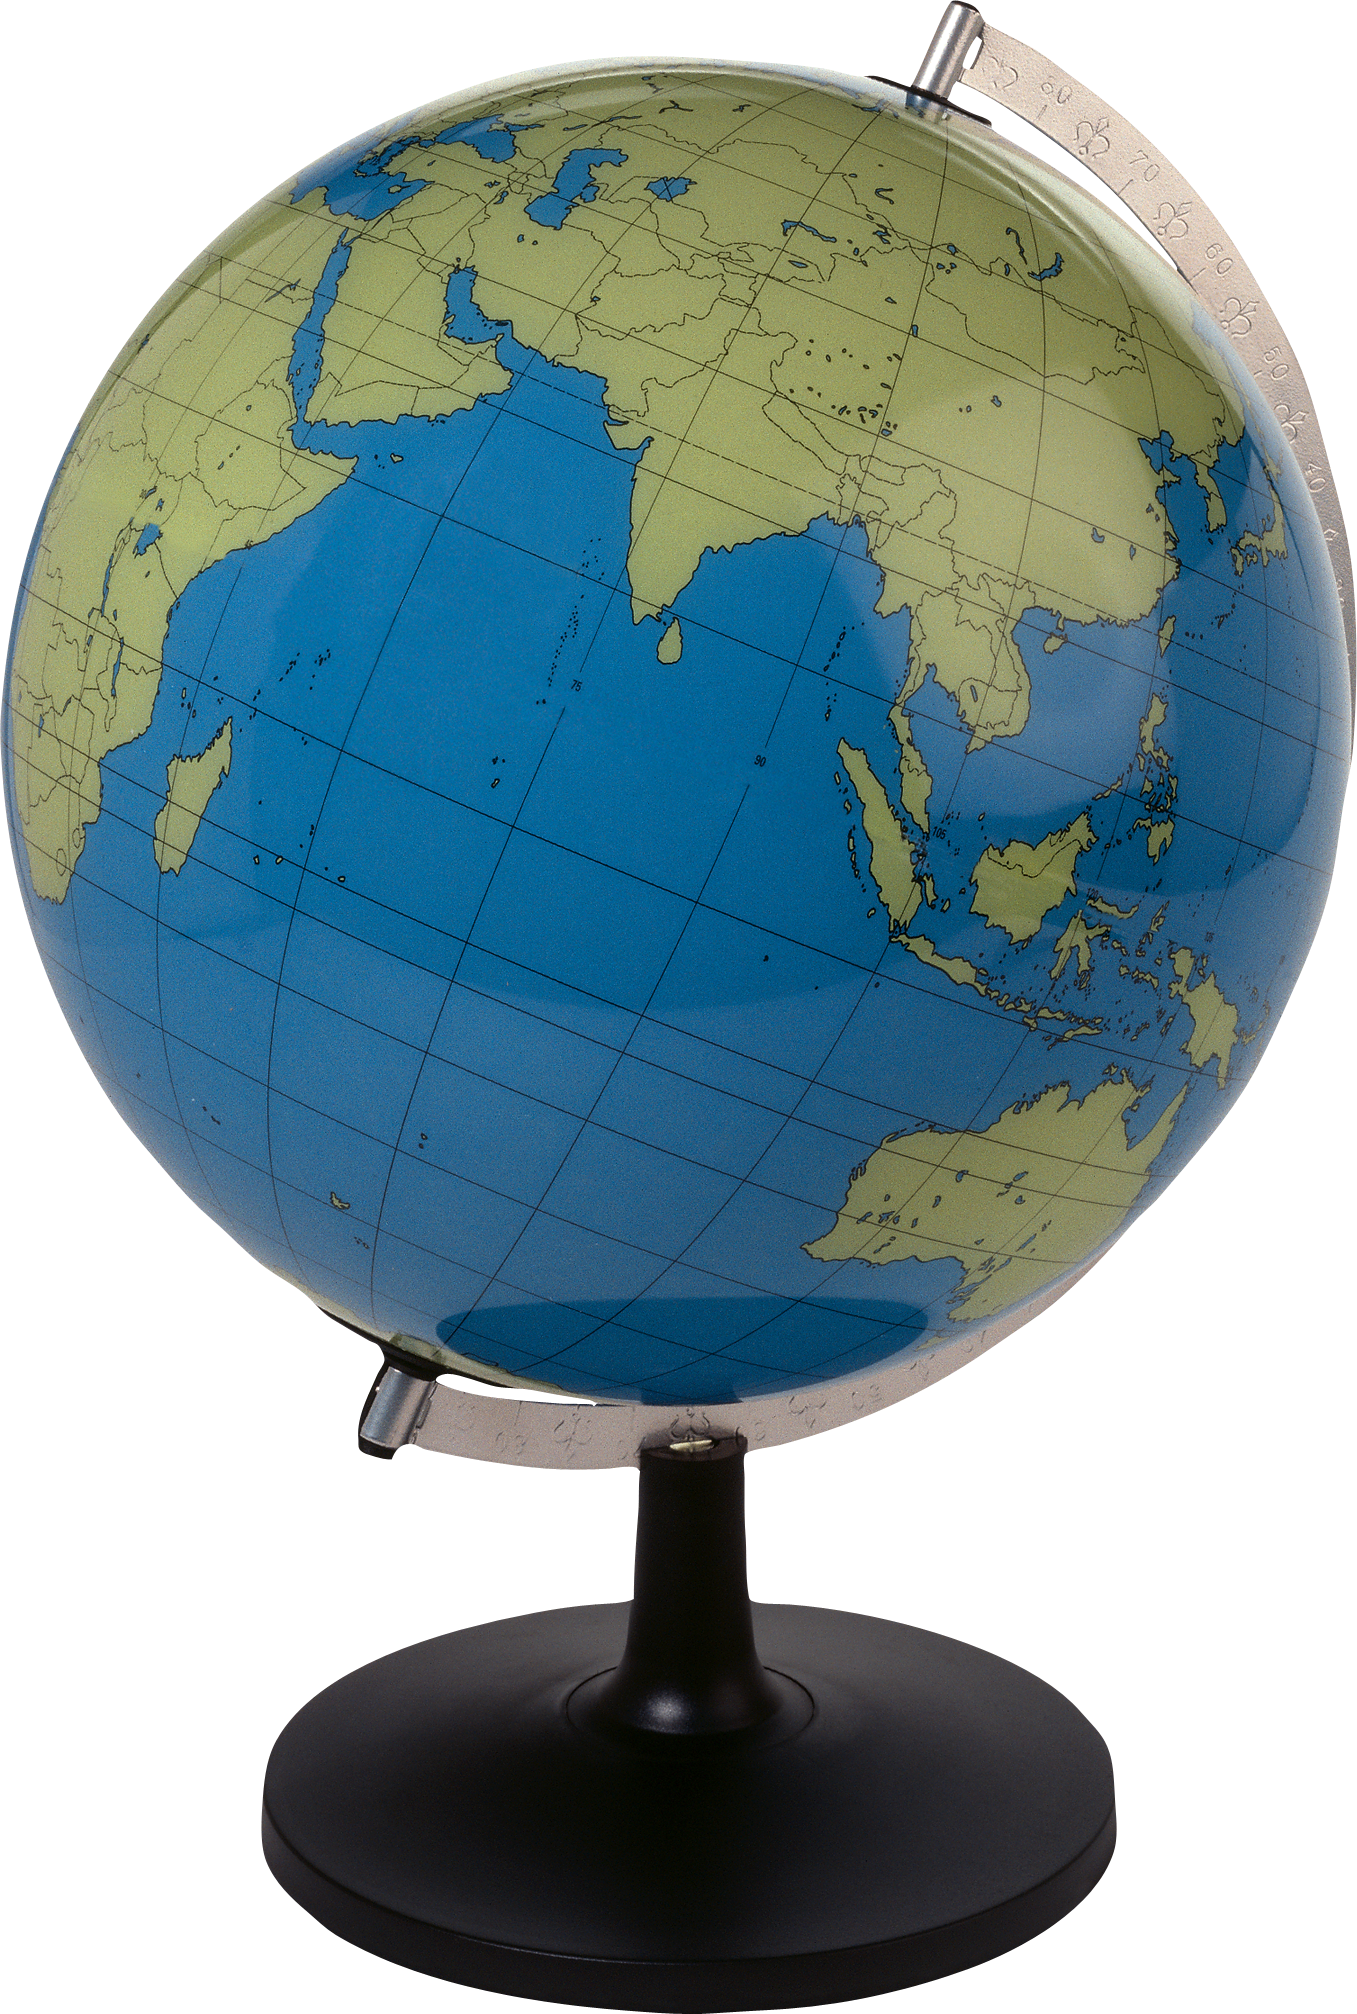 Globe PNG images Download 